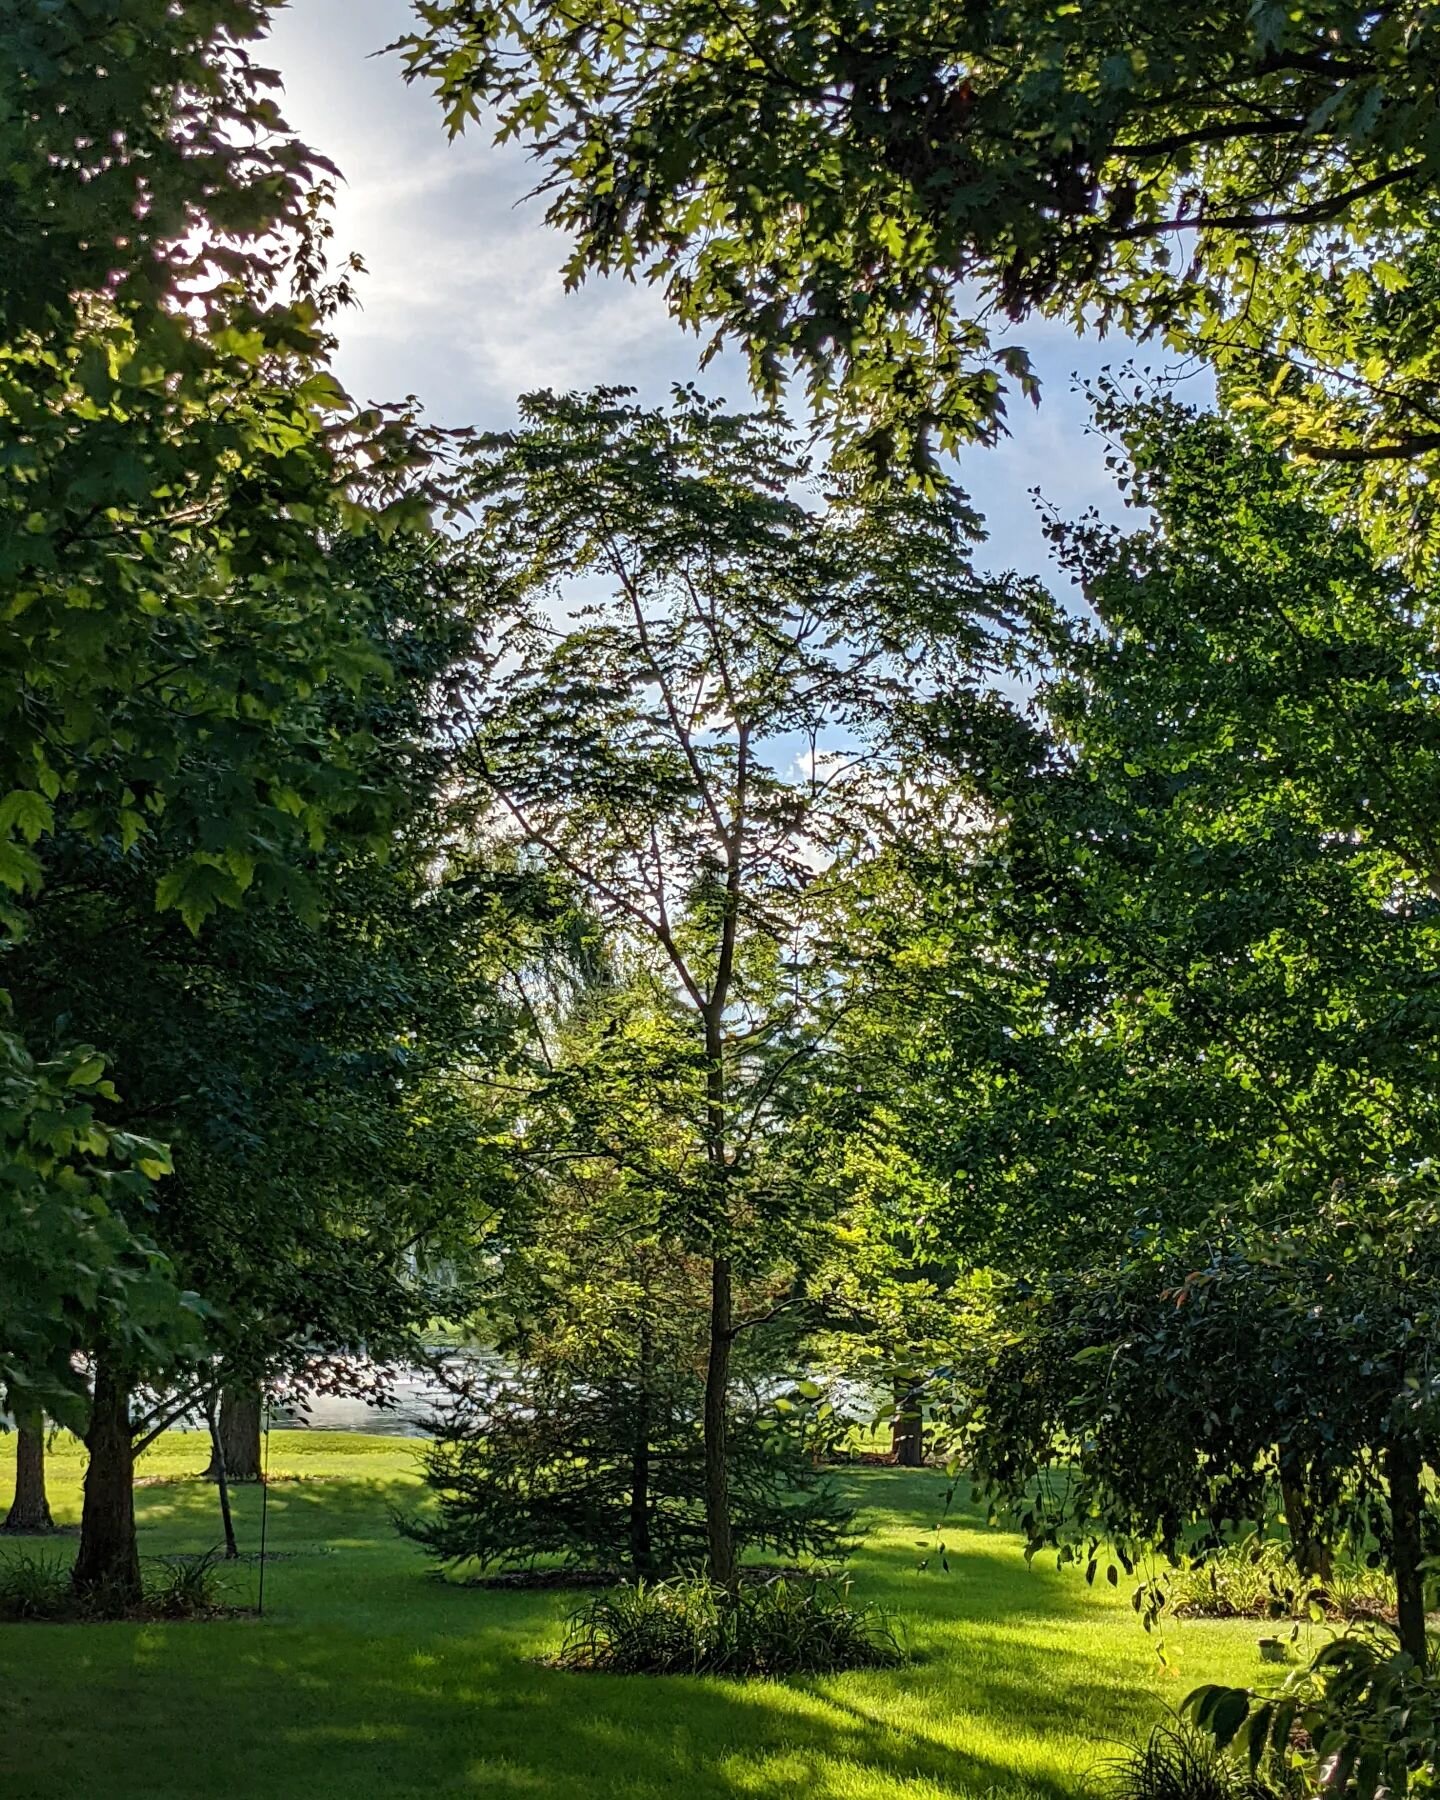 We talk about how we may have too many trees and they may be too close together. But a walk in the (bigger) woods, below a beautiful green canopy, reminds me they'll be just fine.

Center stage is the Kentucky coffeetree. (It makes for really bad cof